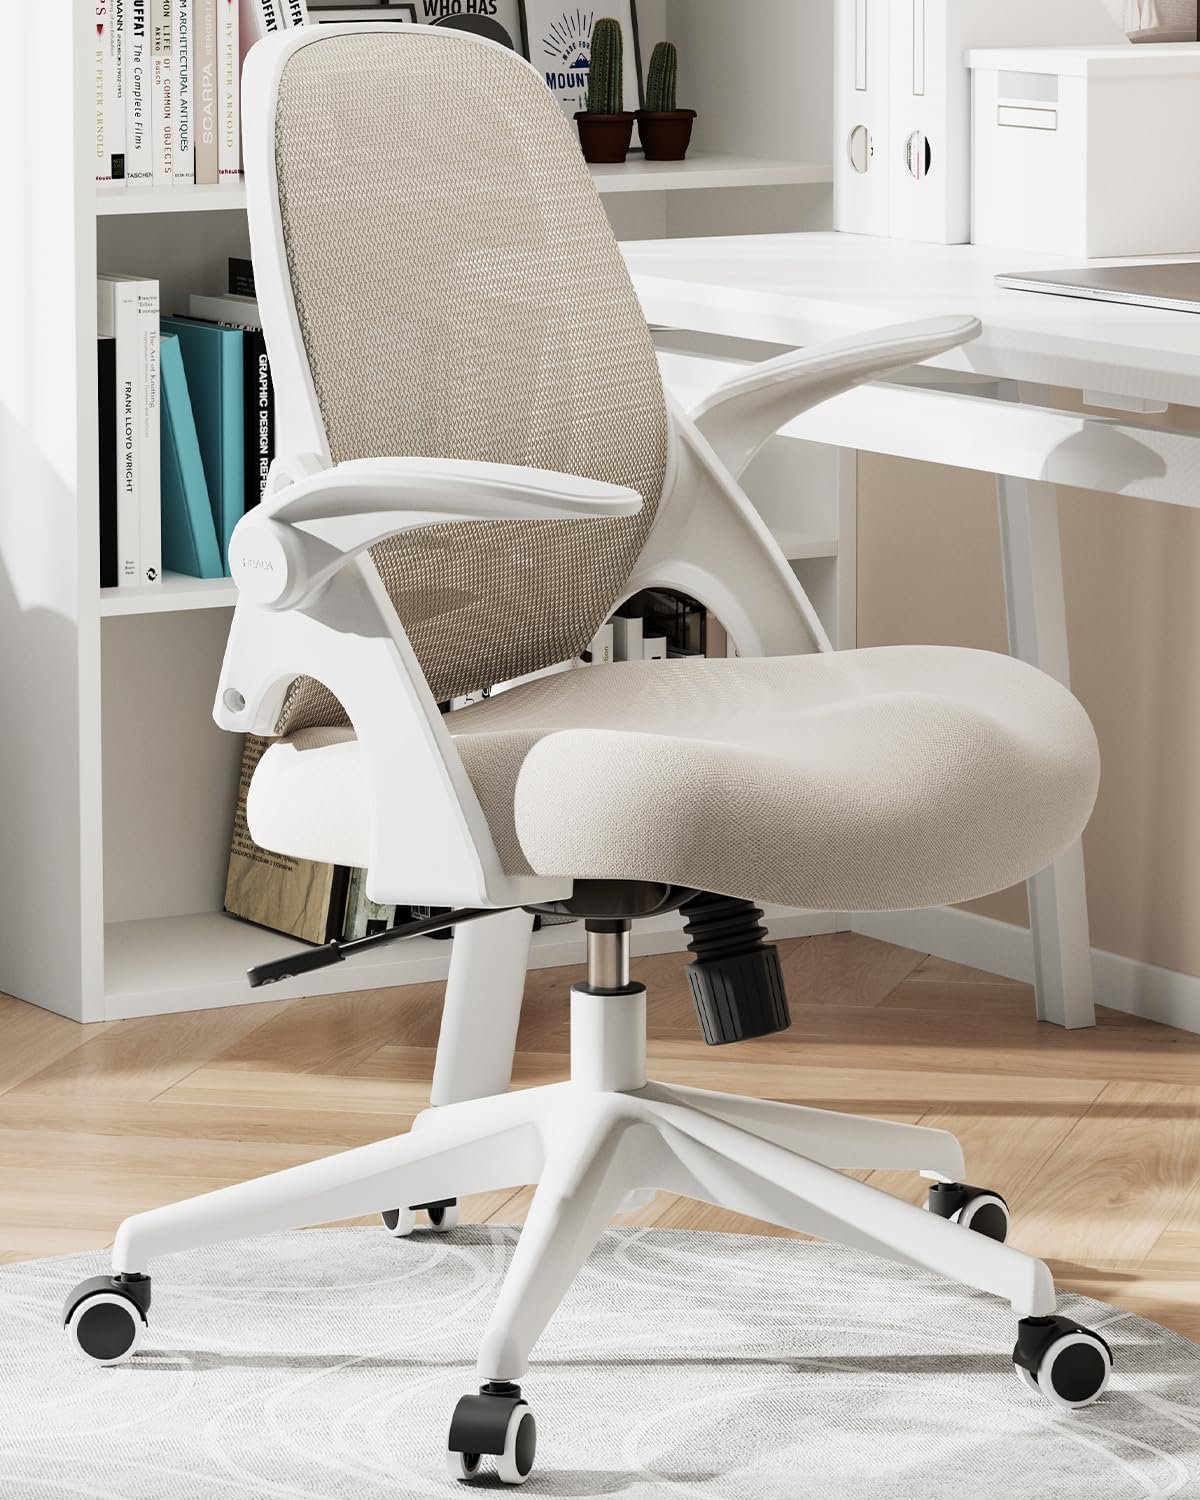 Hbada Office Chair, Desk Chair with Flip-Up Armrests and Saddle Cushion, Ergonomic Office Chair with S-Shaped Backrest, Swivel, Mesh, for Home and Office, Beige